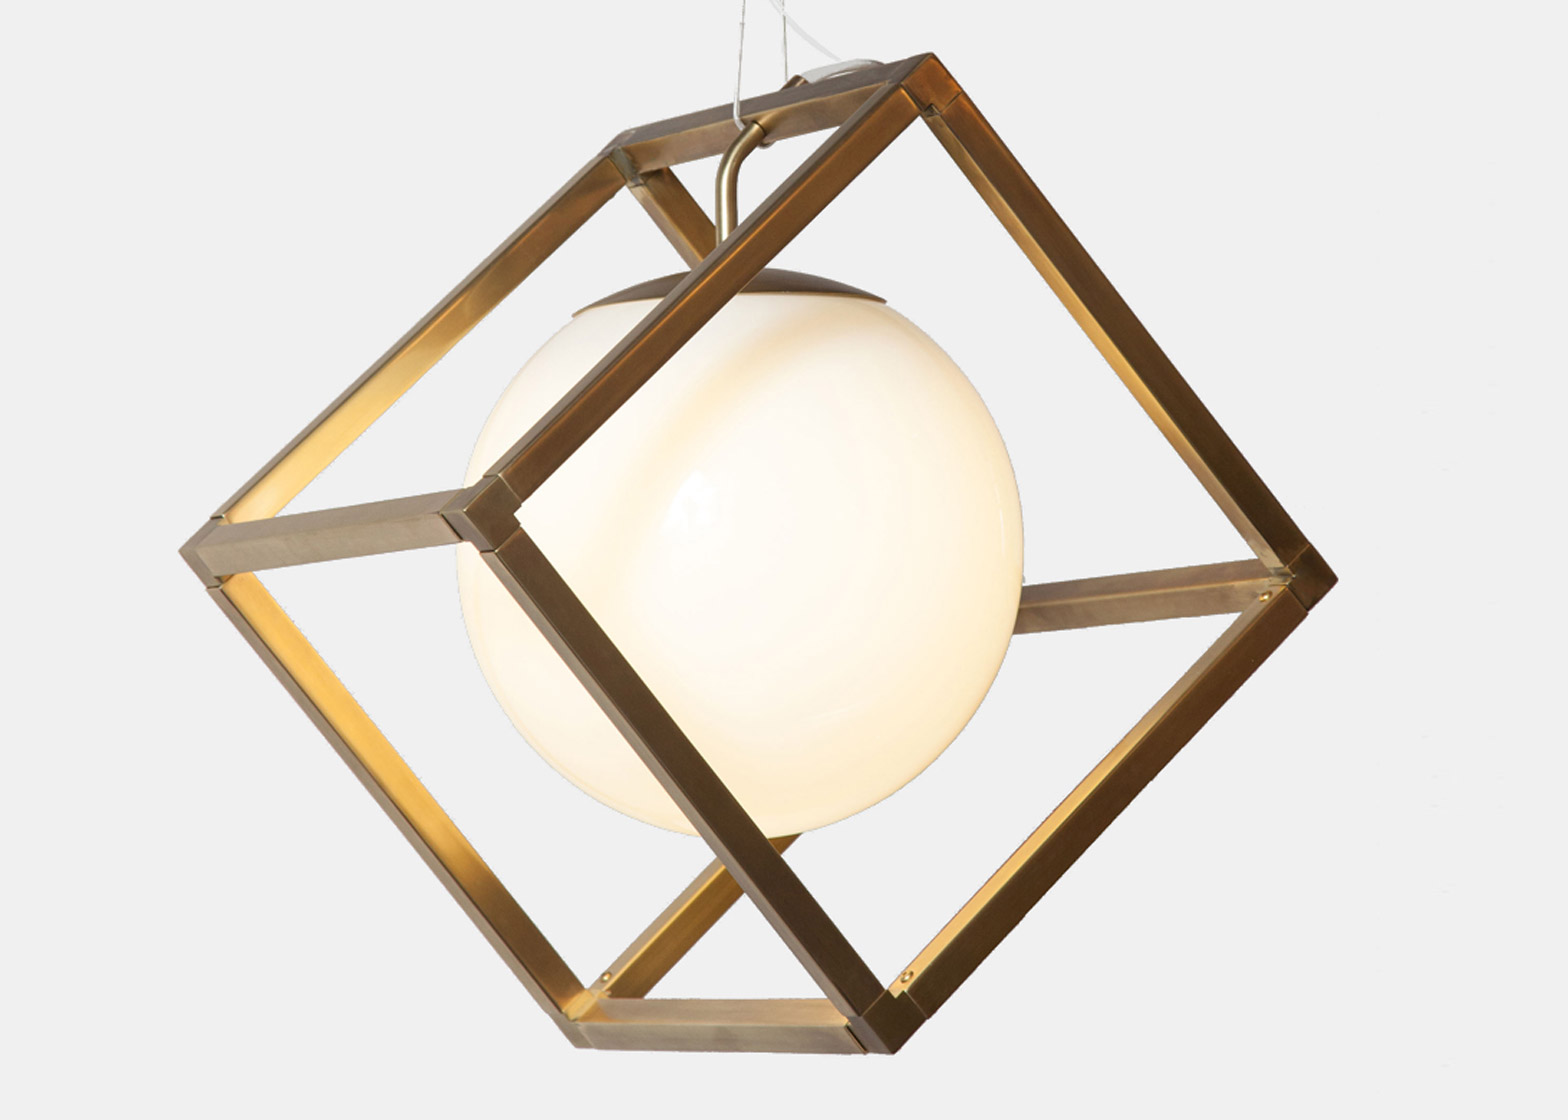 Minimalist lighting collection based on simple geometric forms  1